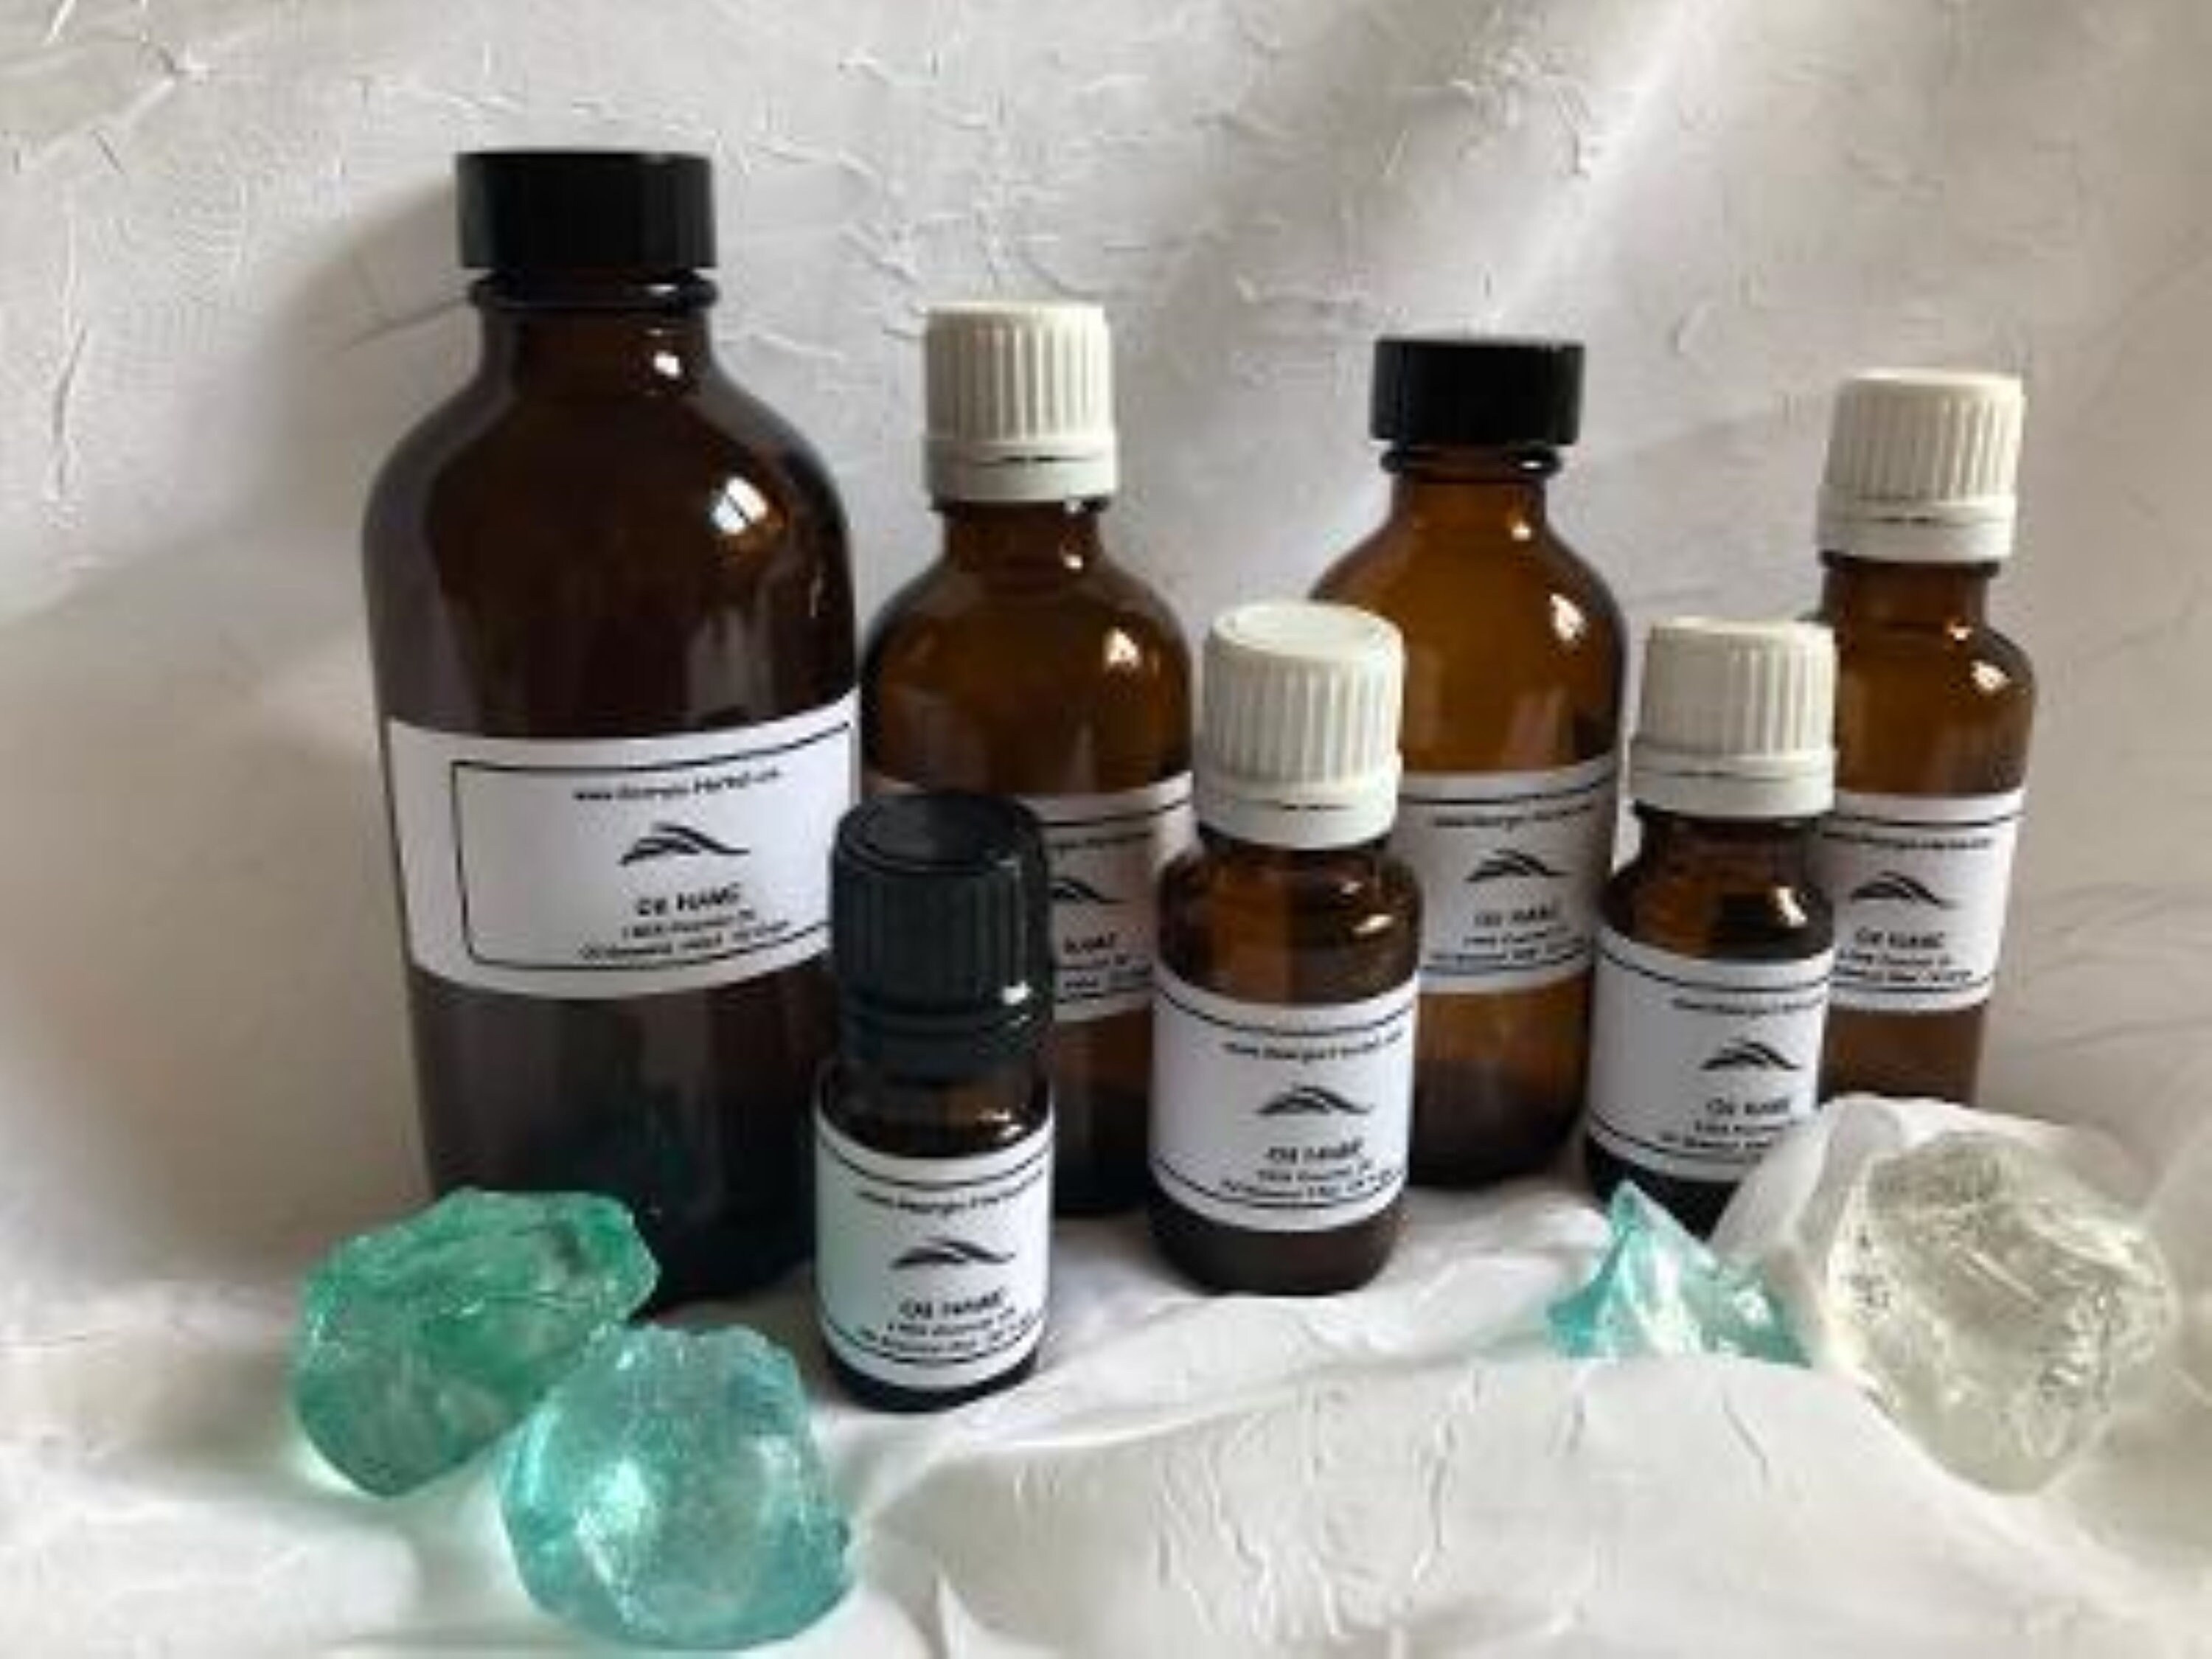 Our Version of No. 5 Fragrance Oil (60ml) for Perfume, Diffusers, Soap  Making, Candles, Lotion, Home Scents, Linen Spray, Bath Bombs, Slime